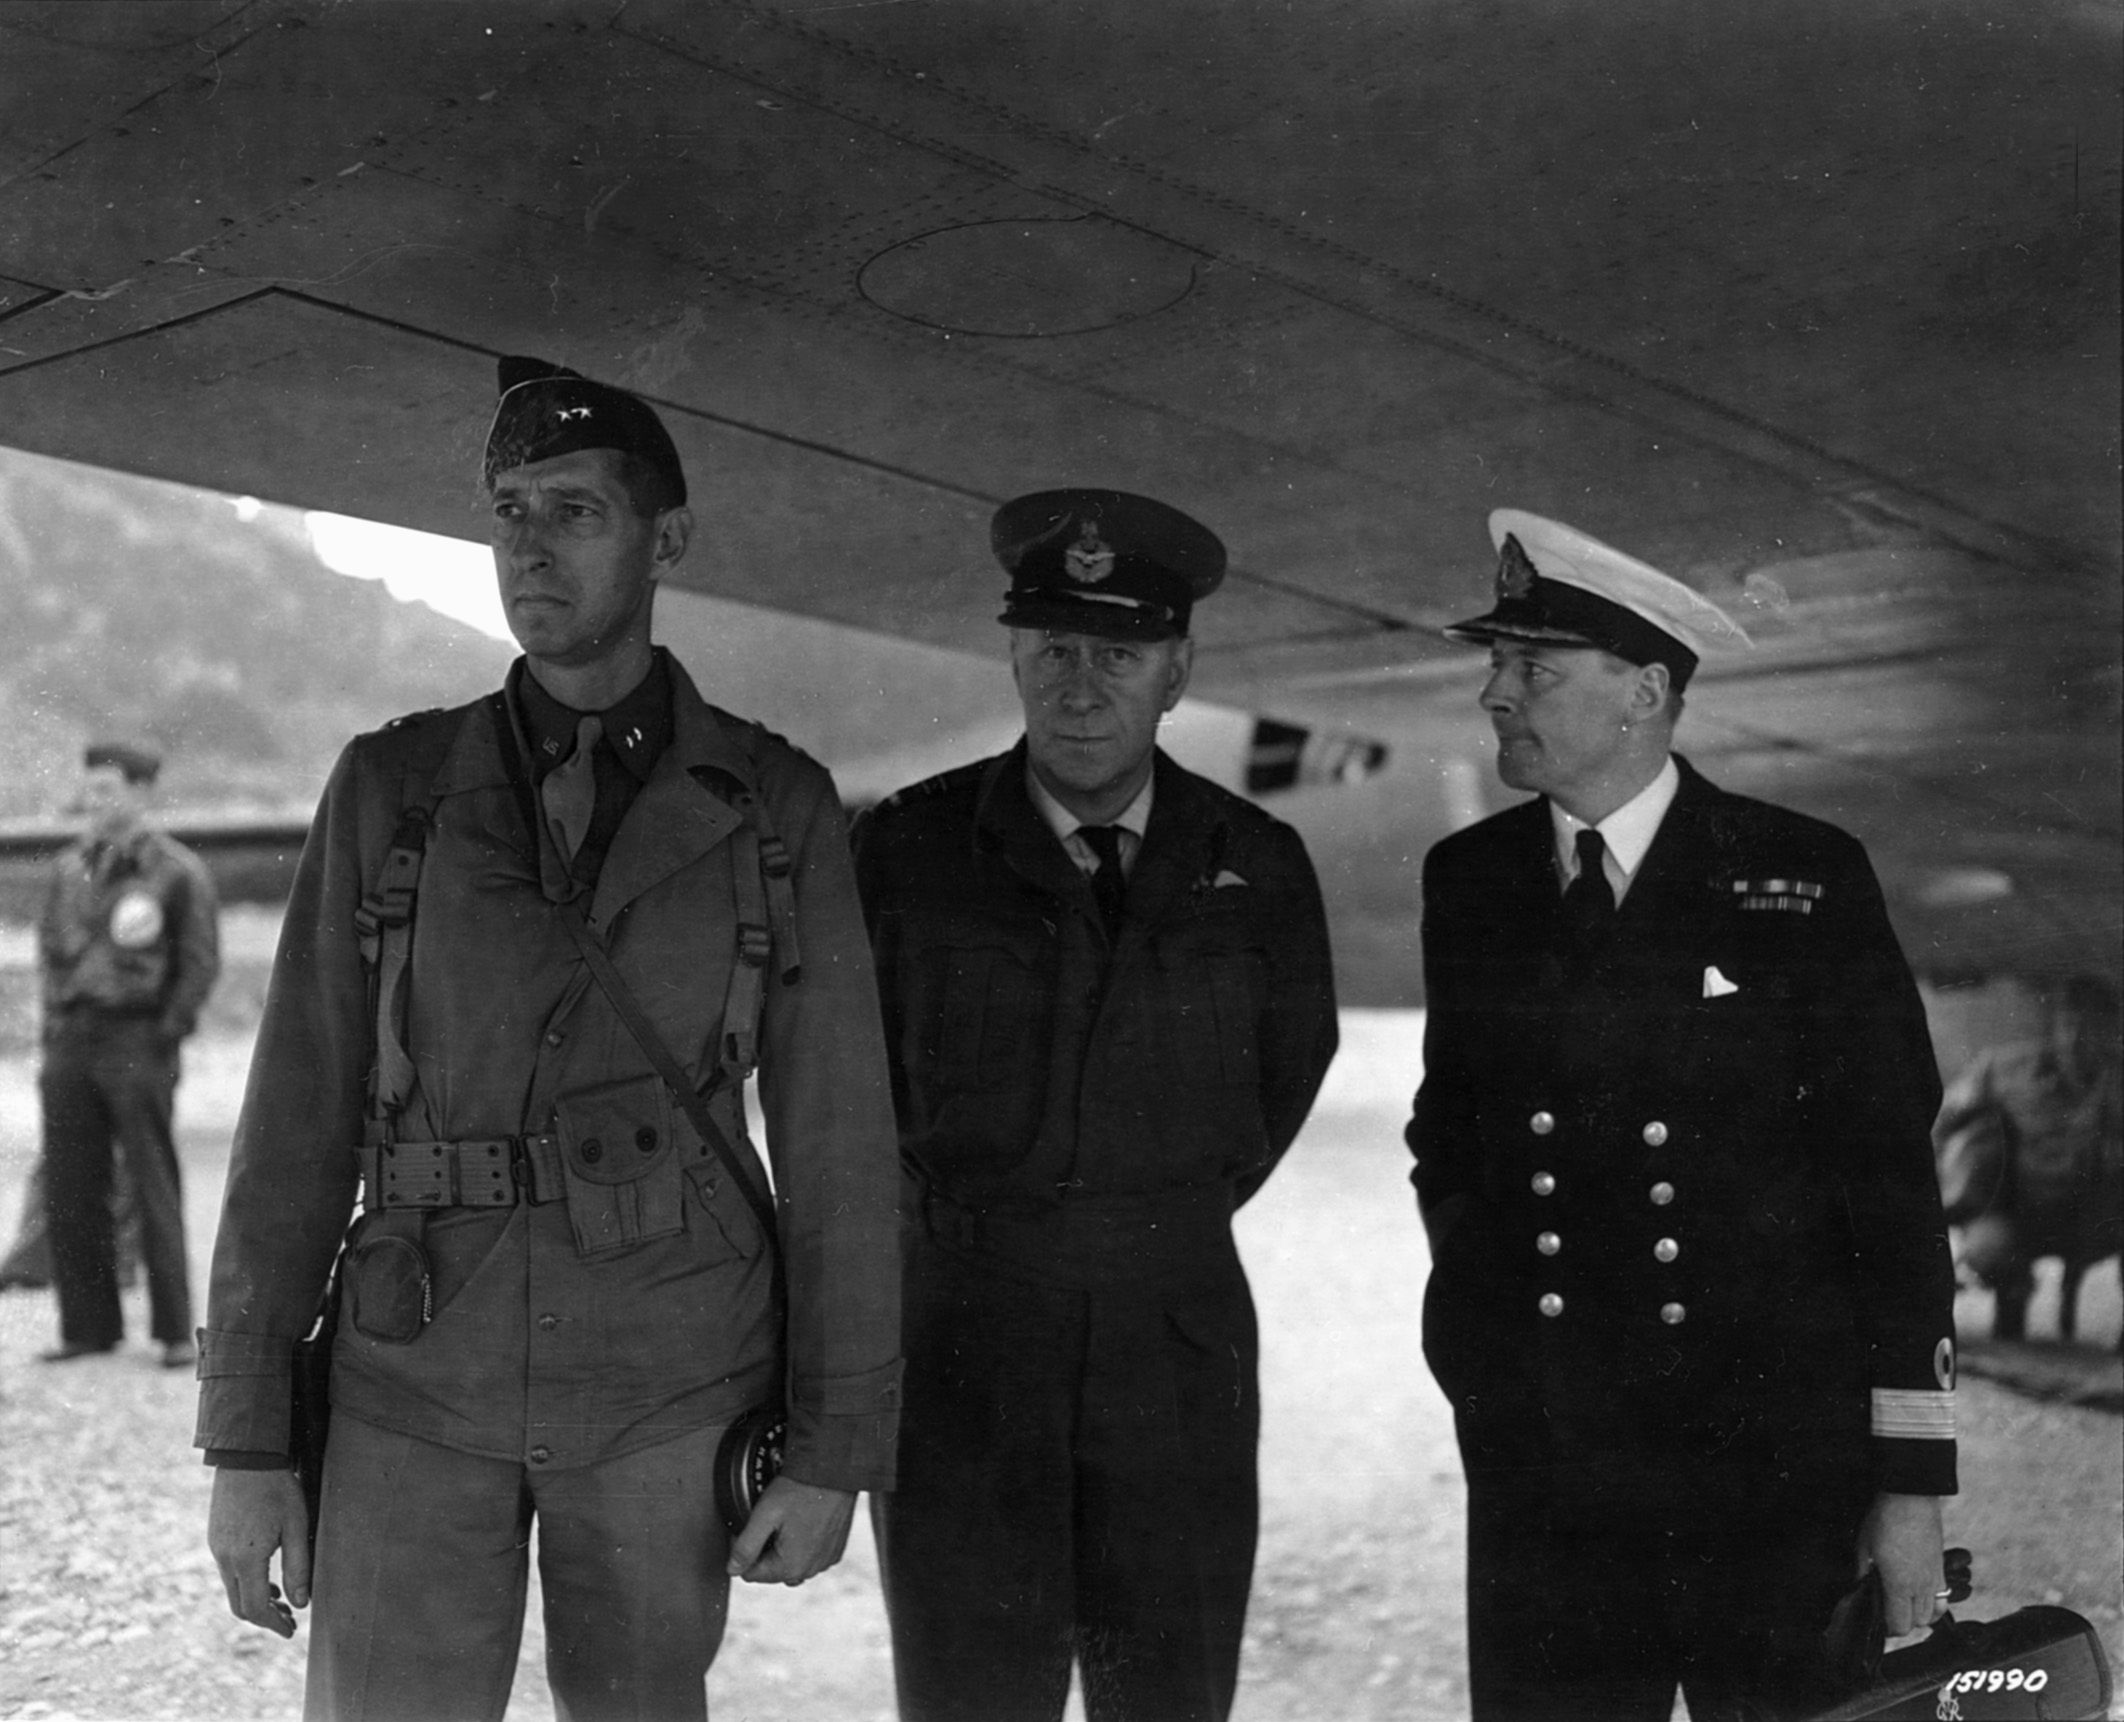 Clark, pictured here with a group of British soldiers, met for a final discussion with Eisenhower on October 4, 1942, a month before the landings in North Africa.